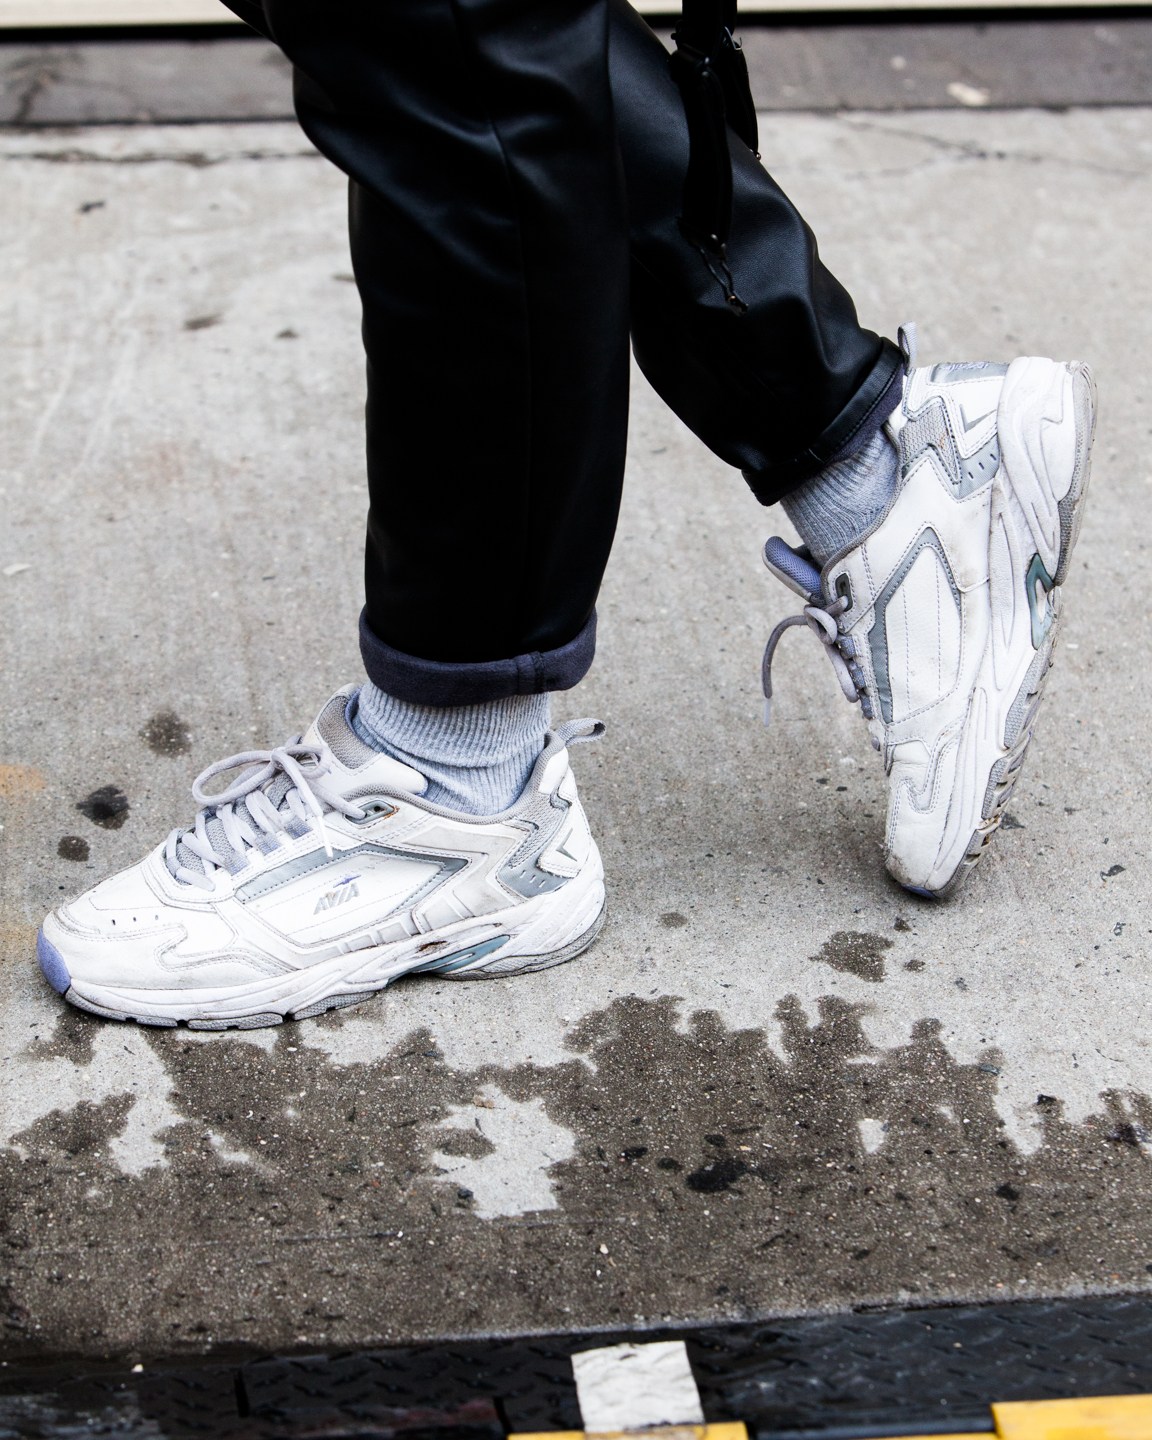 The 27 Strongest Street Style Looks From Men’s Fashion Week | The FADER